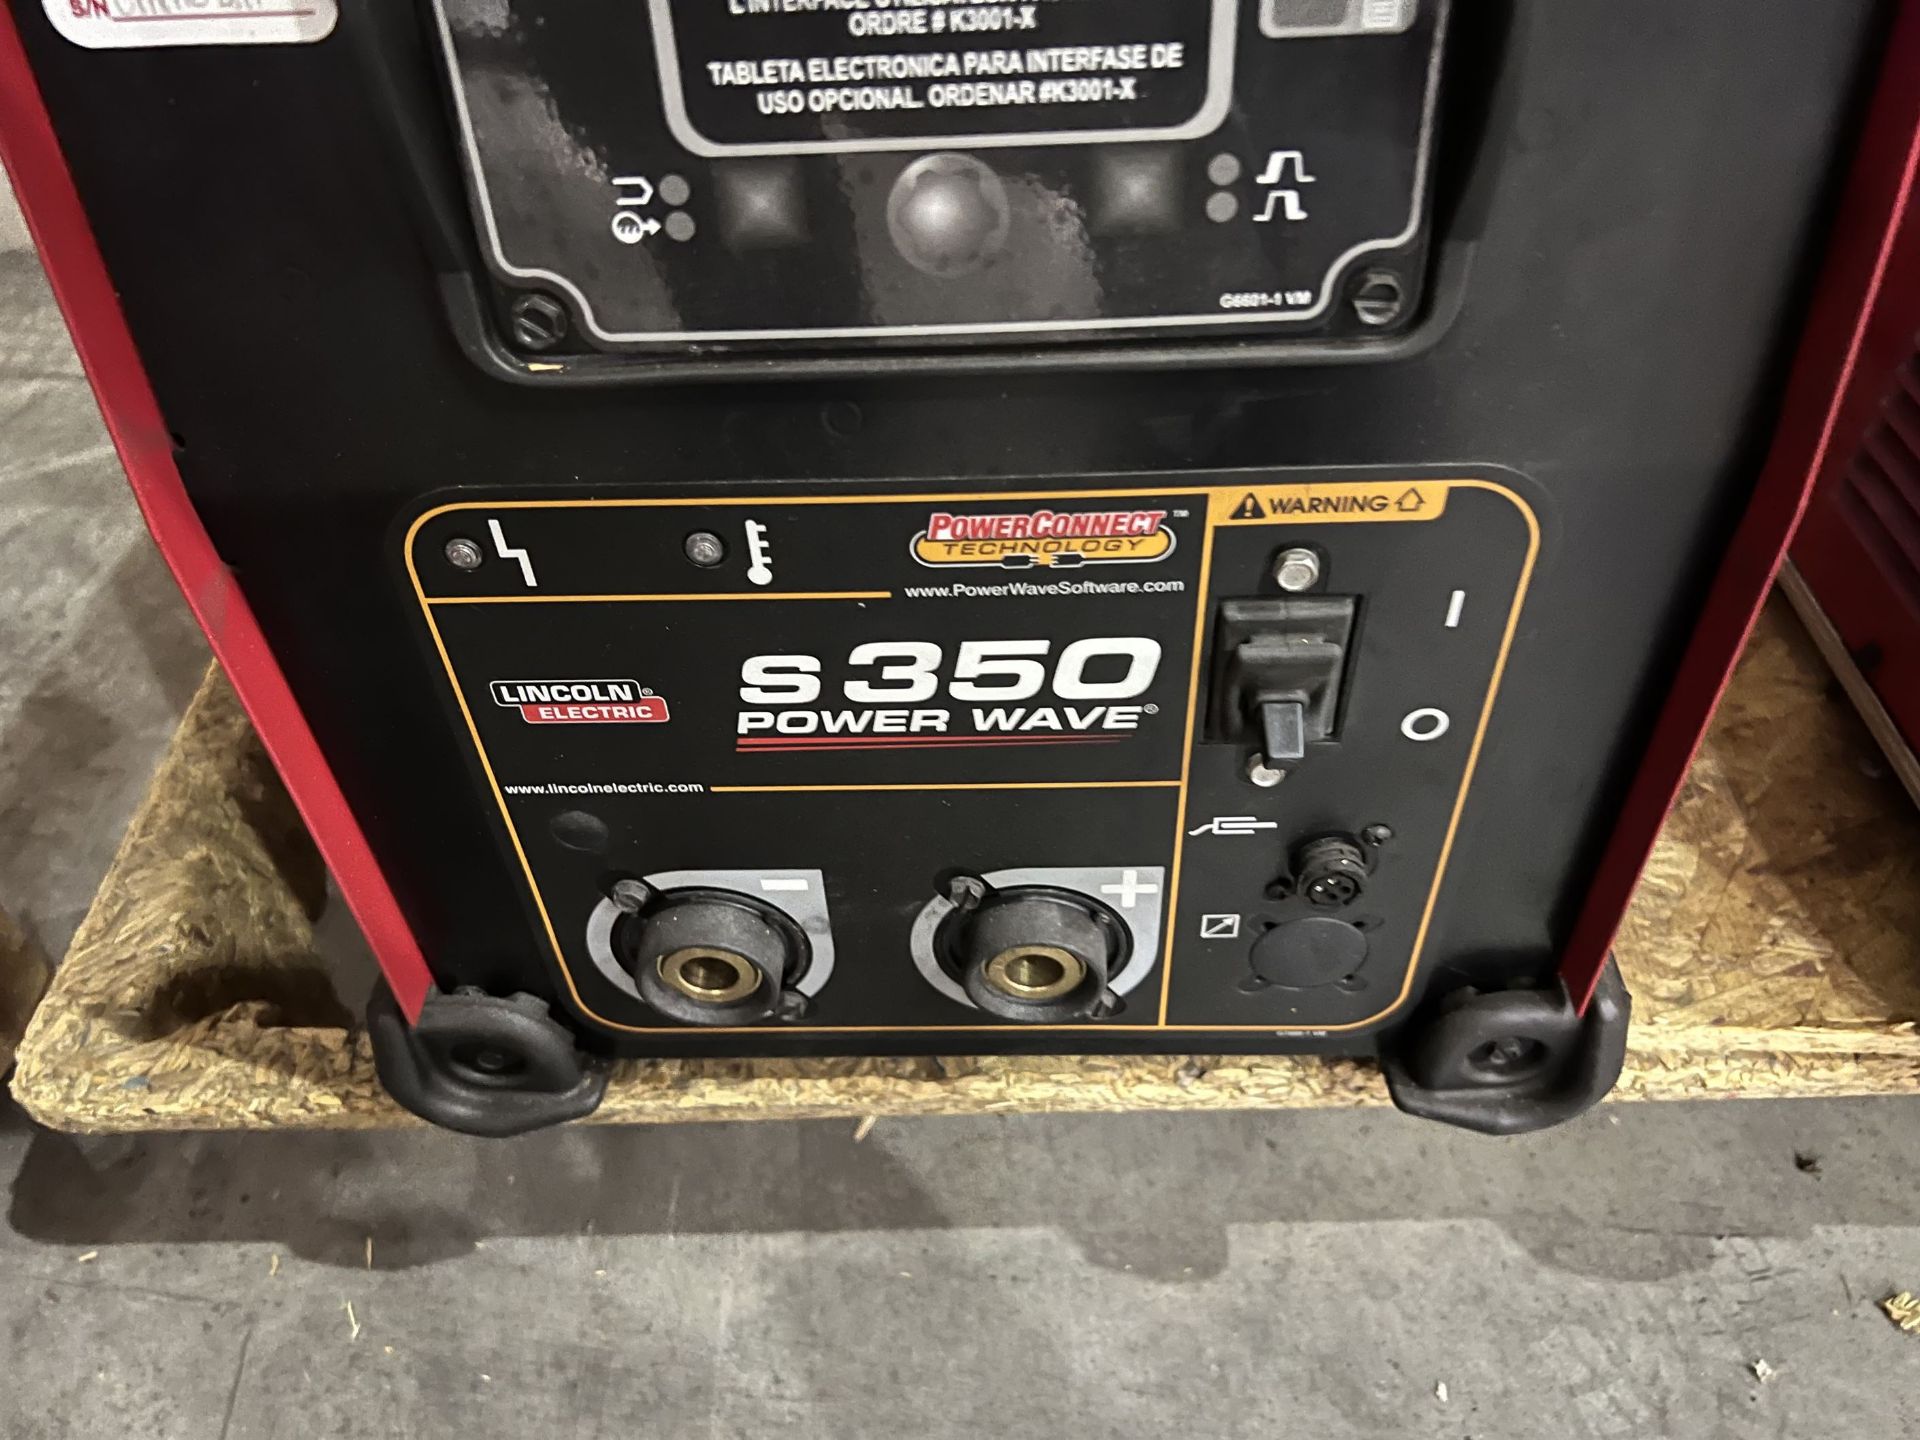 Lincoln S350 Power Wave Welder s/n U1181102811 (Located at 7300 Lone Tree Rd, Victoria, TX 77905) - Image 2 of 3